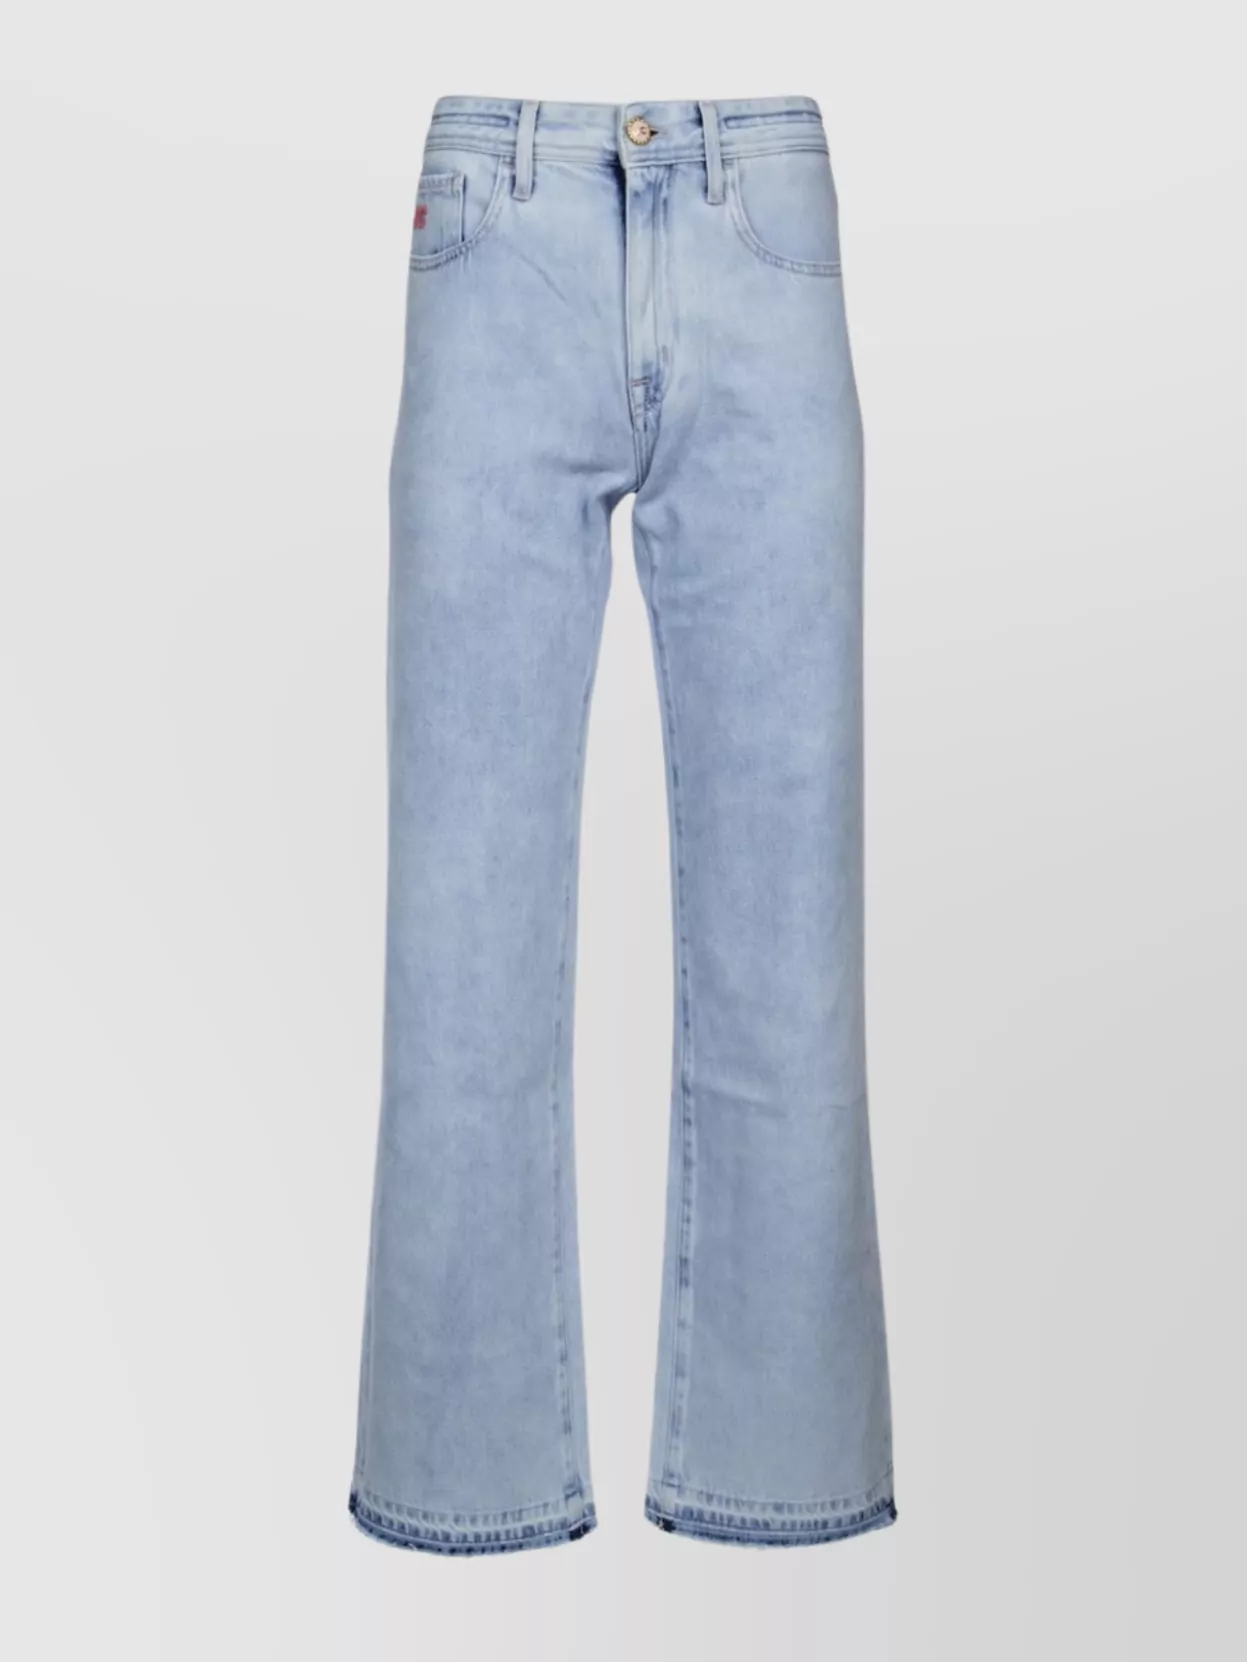 Jacob Cohen Denim Trousers With Belt Loops And Contrast Stitching In Blue